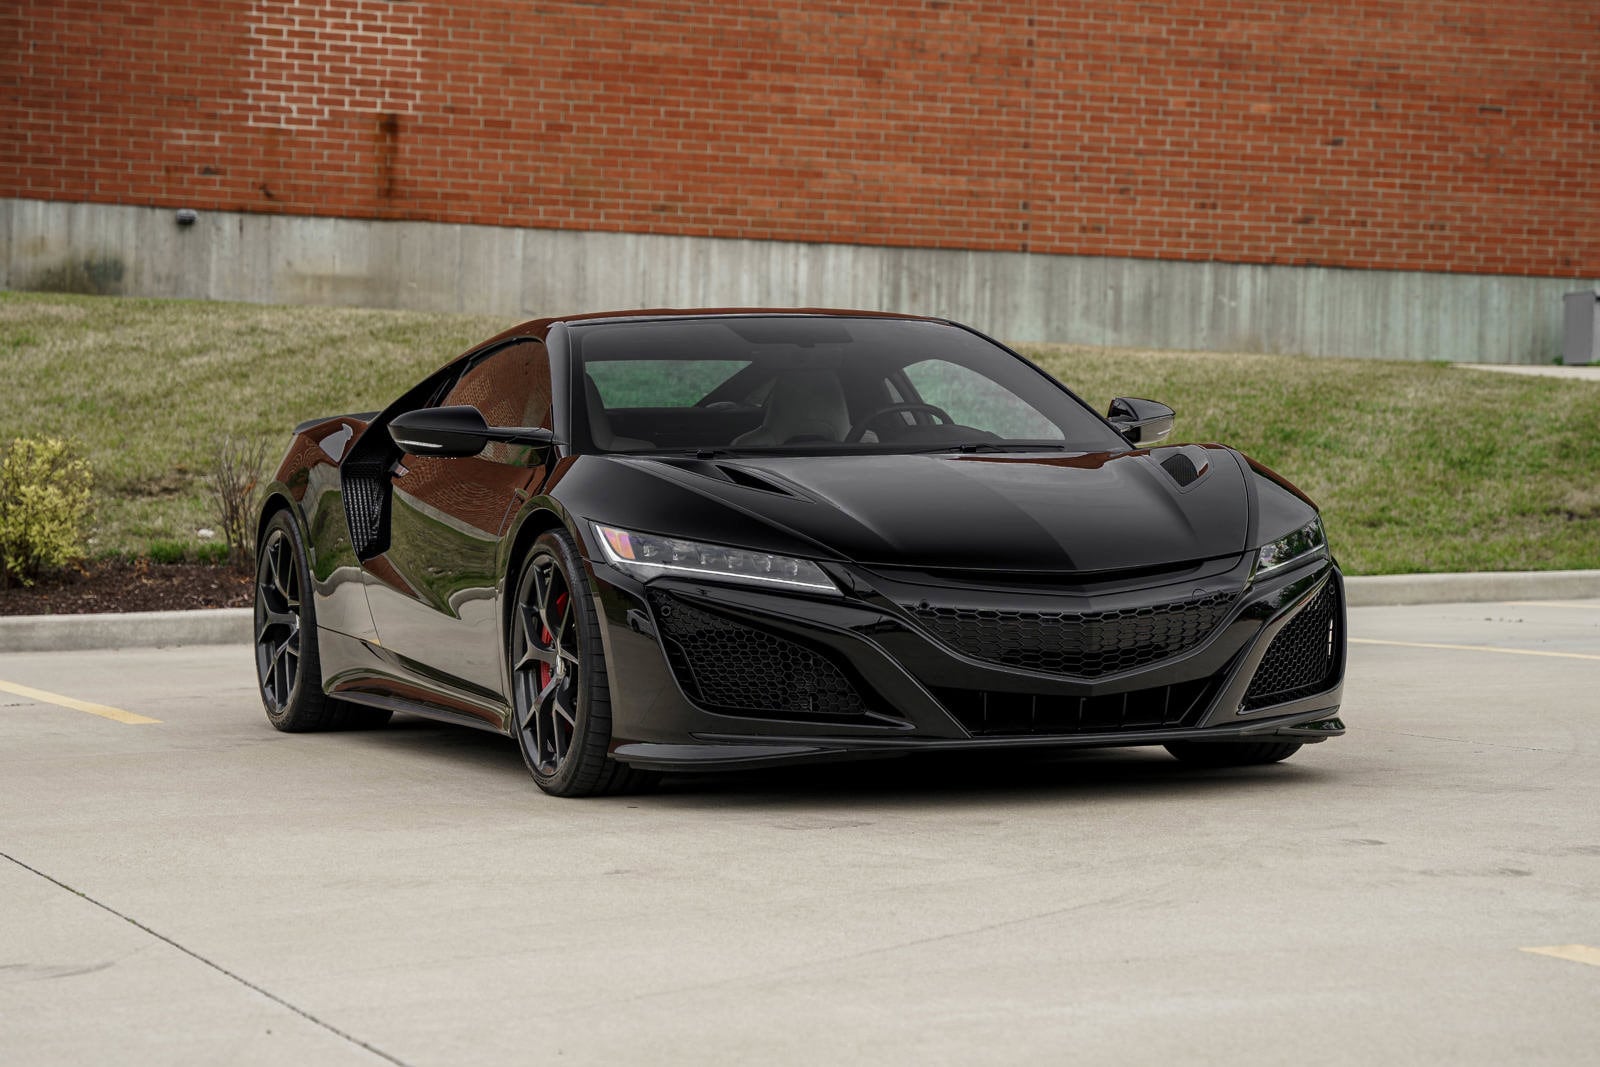 Used 2019 Acura NSX Base with VIN 19UNC1B0XKY000223 for sale in Kirkwood, MO